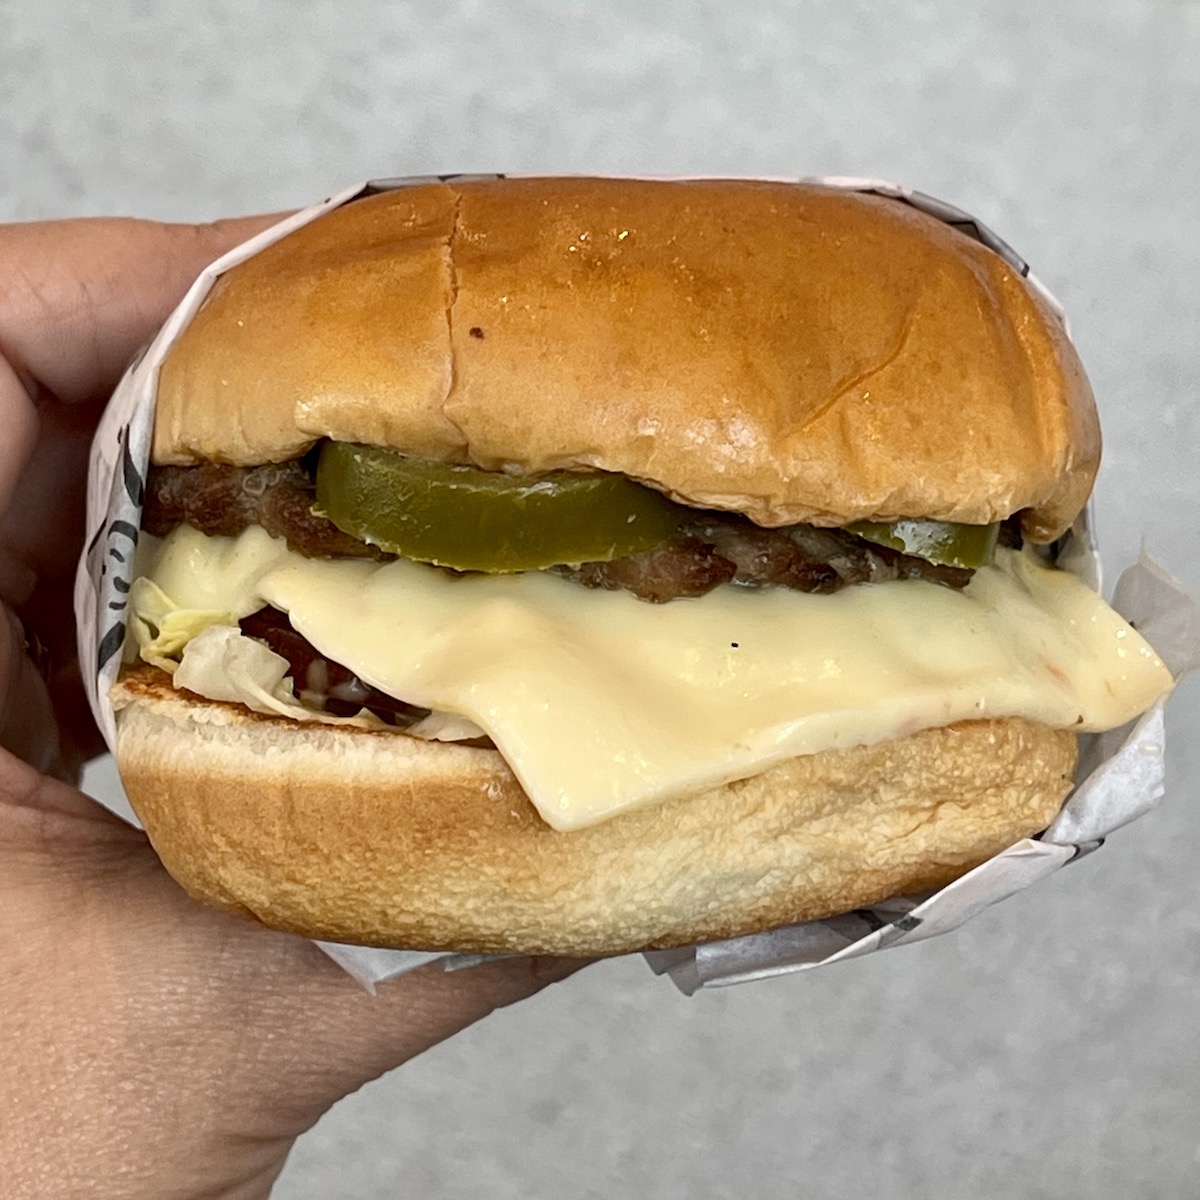 Jalapeño Double Cheeseburger from Carl's Jr. in Doral, Florida